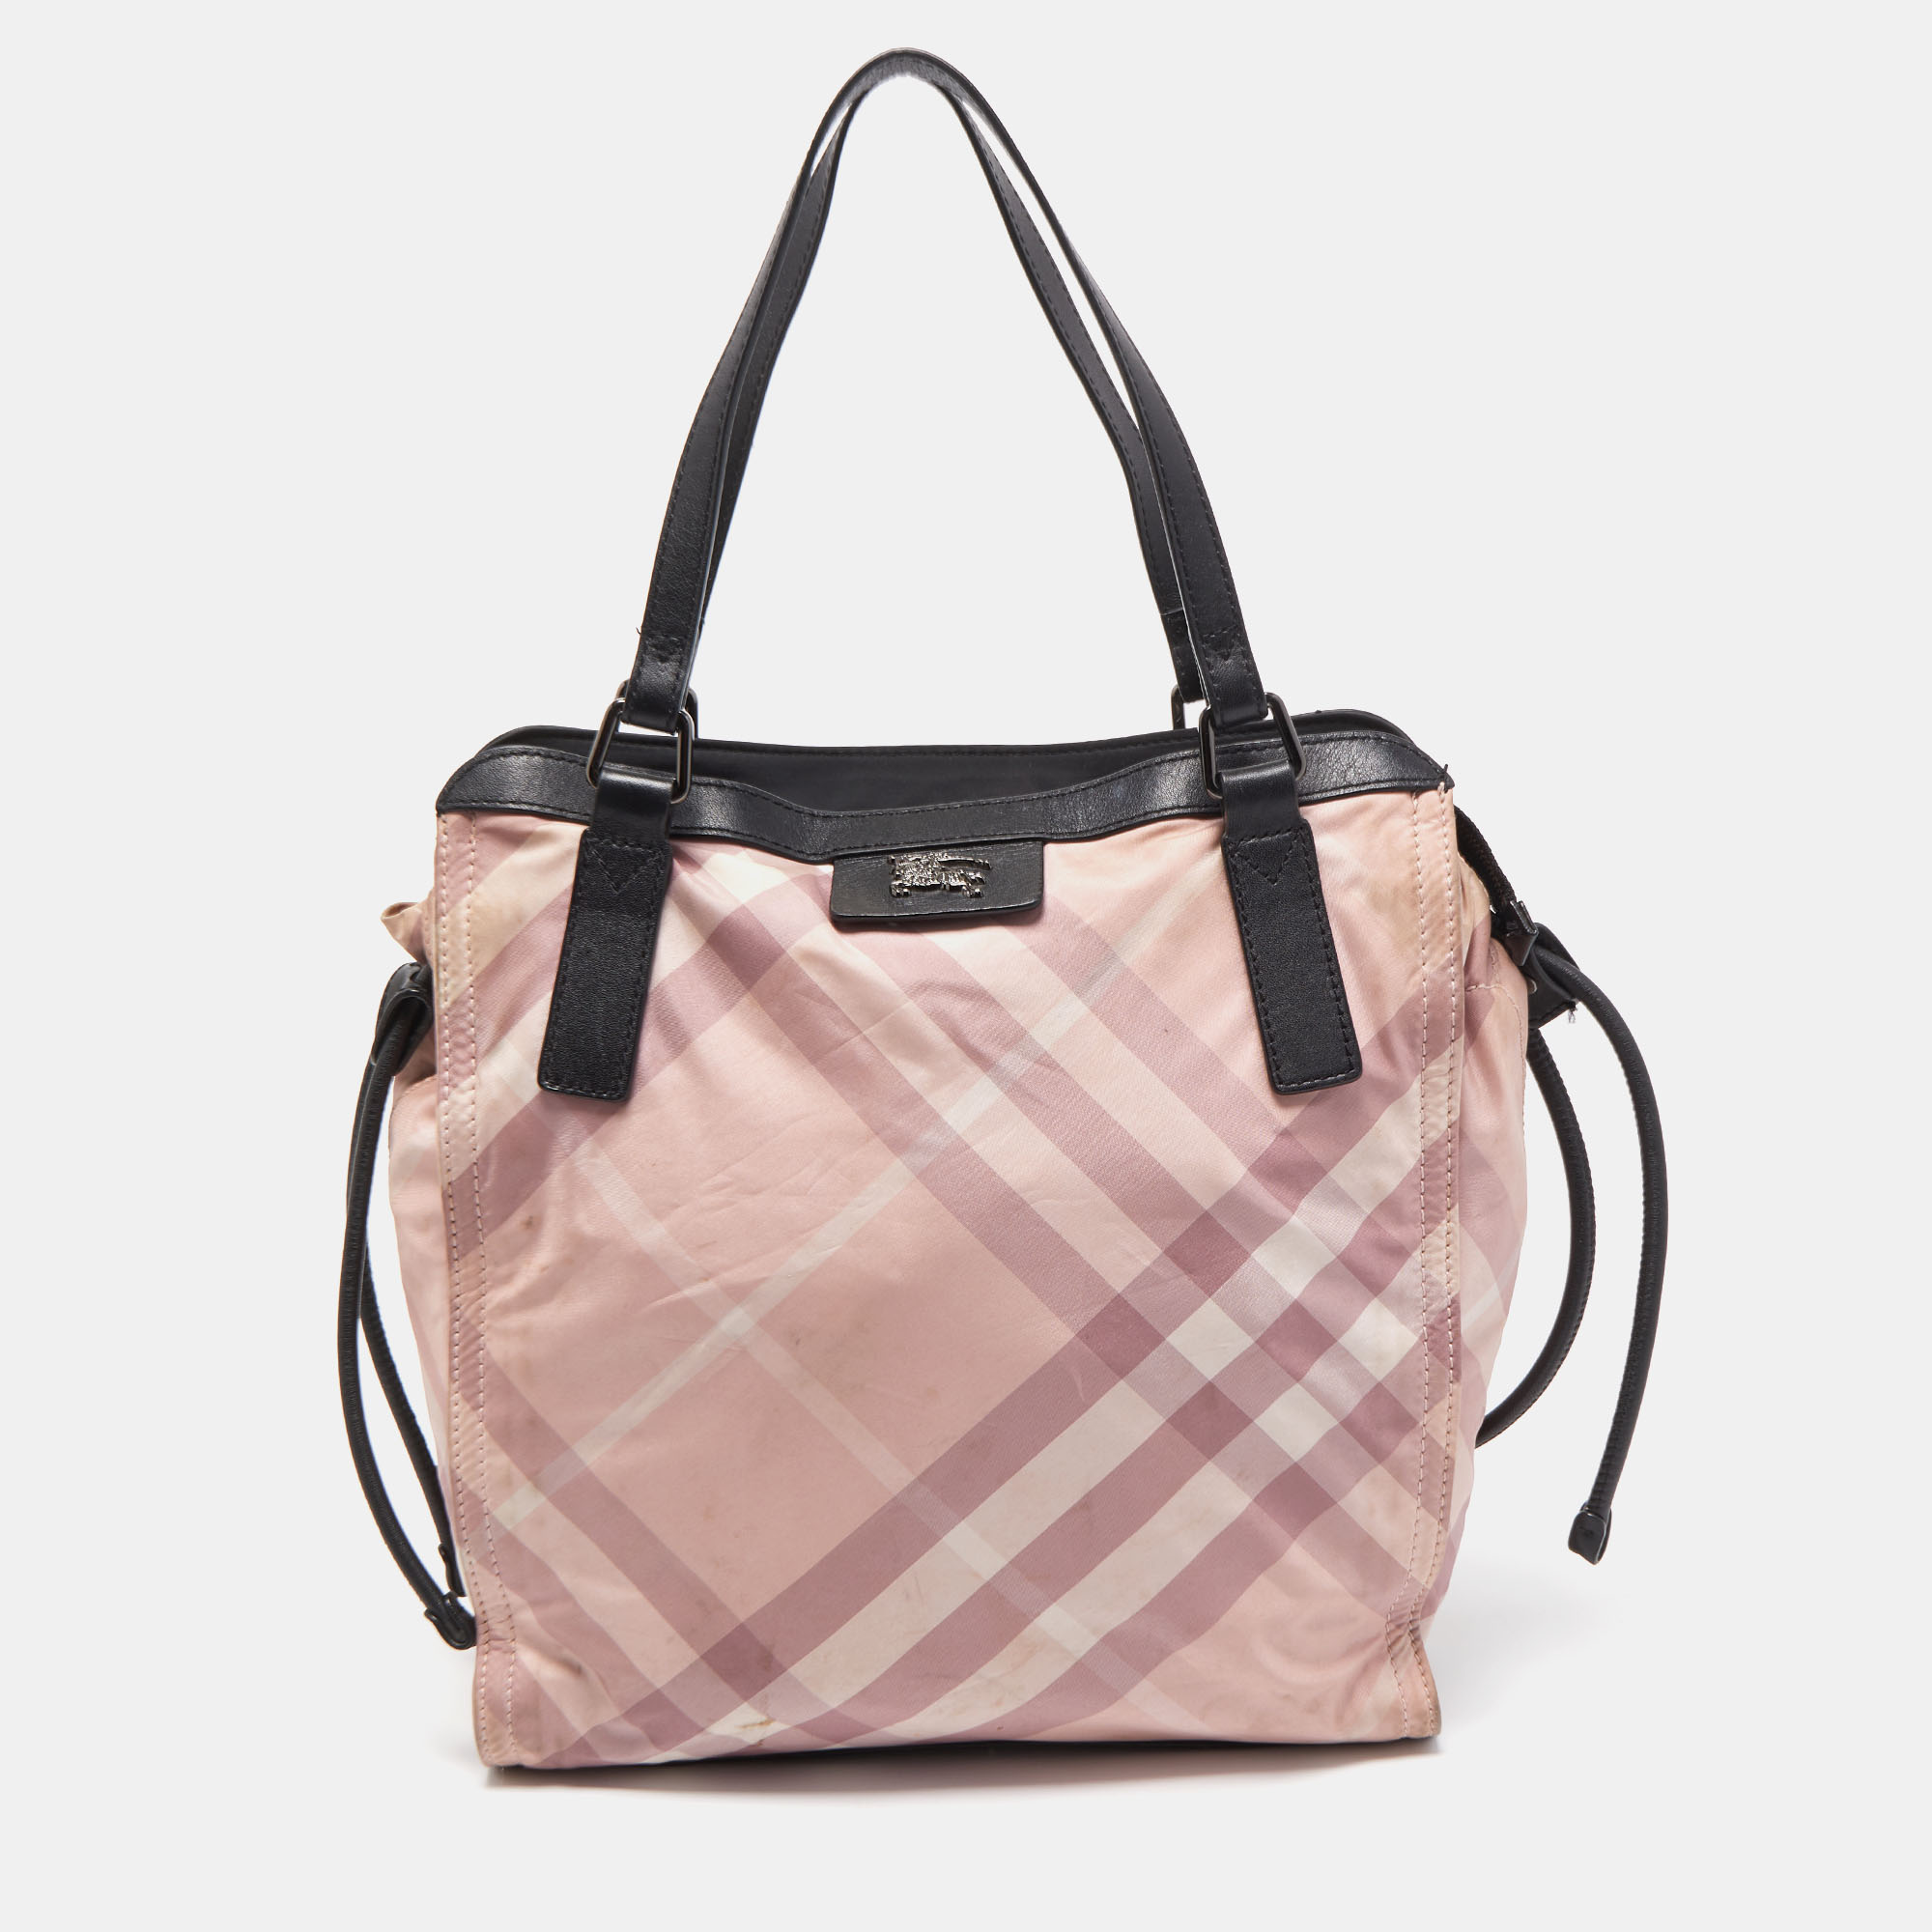 Striking a beautiful balance between essentiality and opulence this tote from the House of Burberry ensures that your handbag requirements are taken care of. It is equipped with practical features for all day ease.